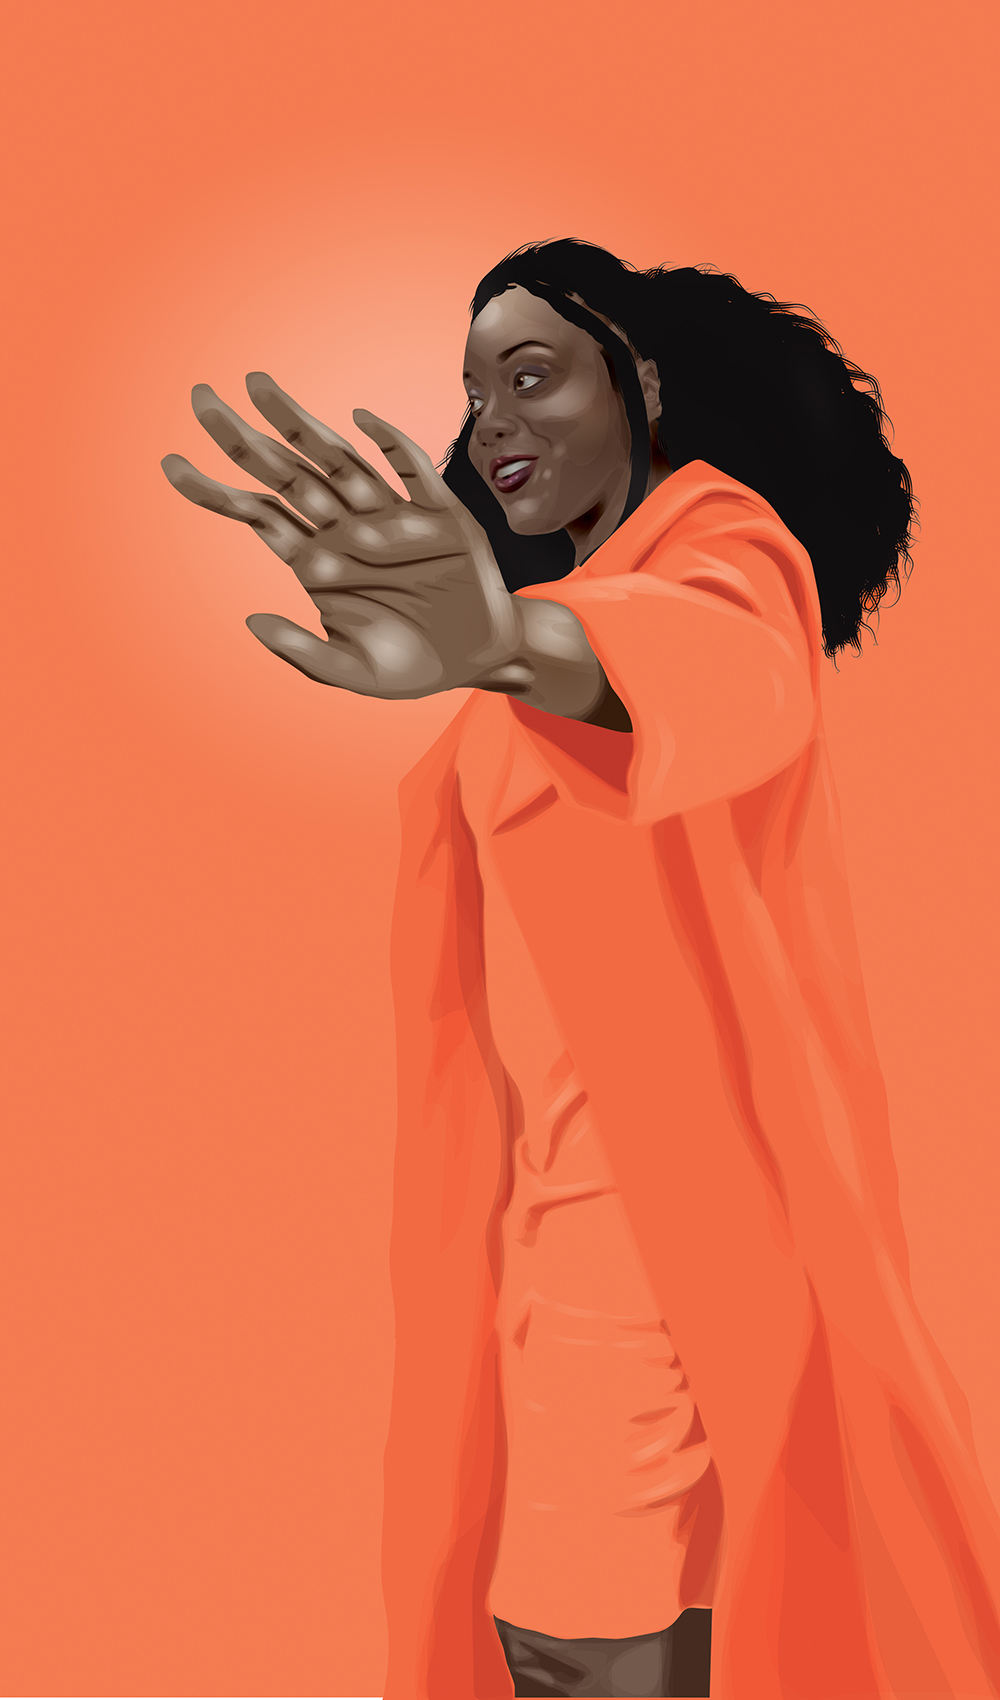 A vector portrait of rapper, Noname on an orange background. She is smiling with her arm extended toward the camera. She is wearing an orange dress with a darker orange trench coat.